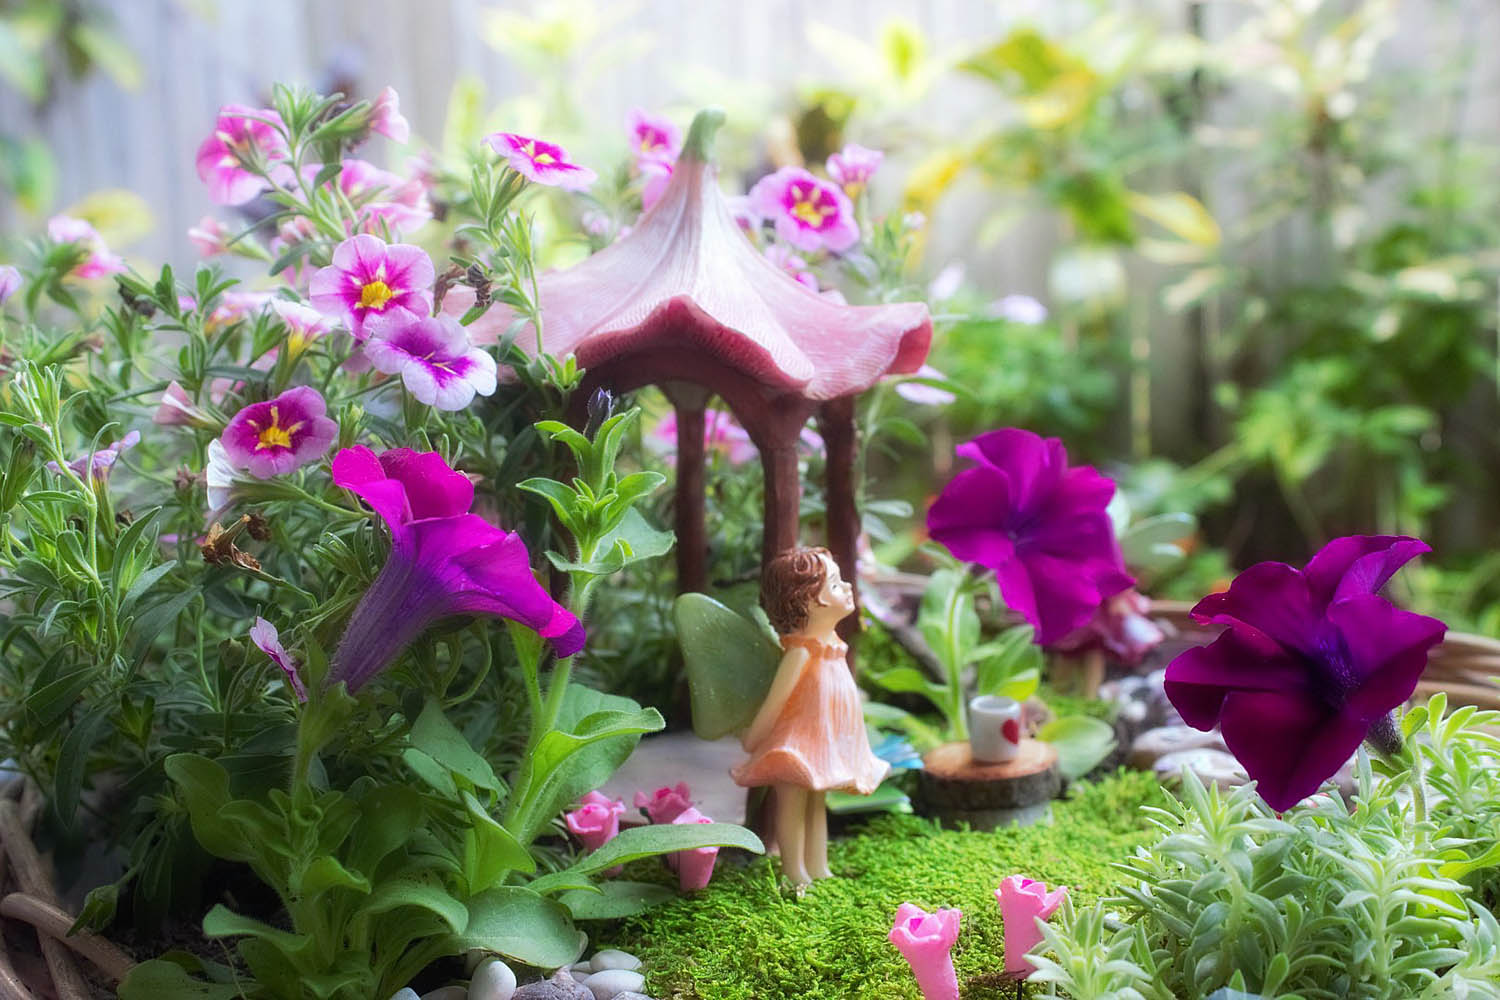 Online E Commerce Fairy Garden Business For Sale In Qld